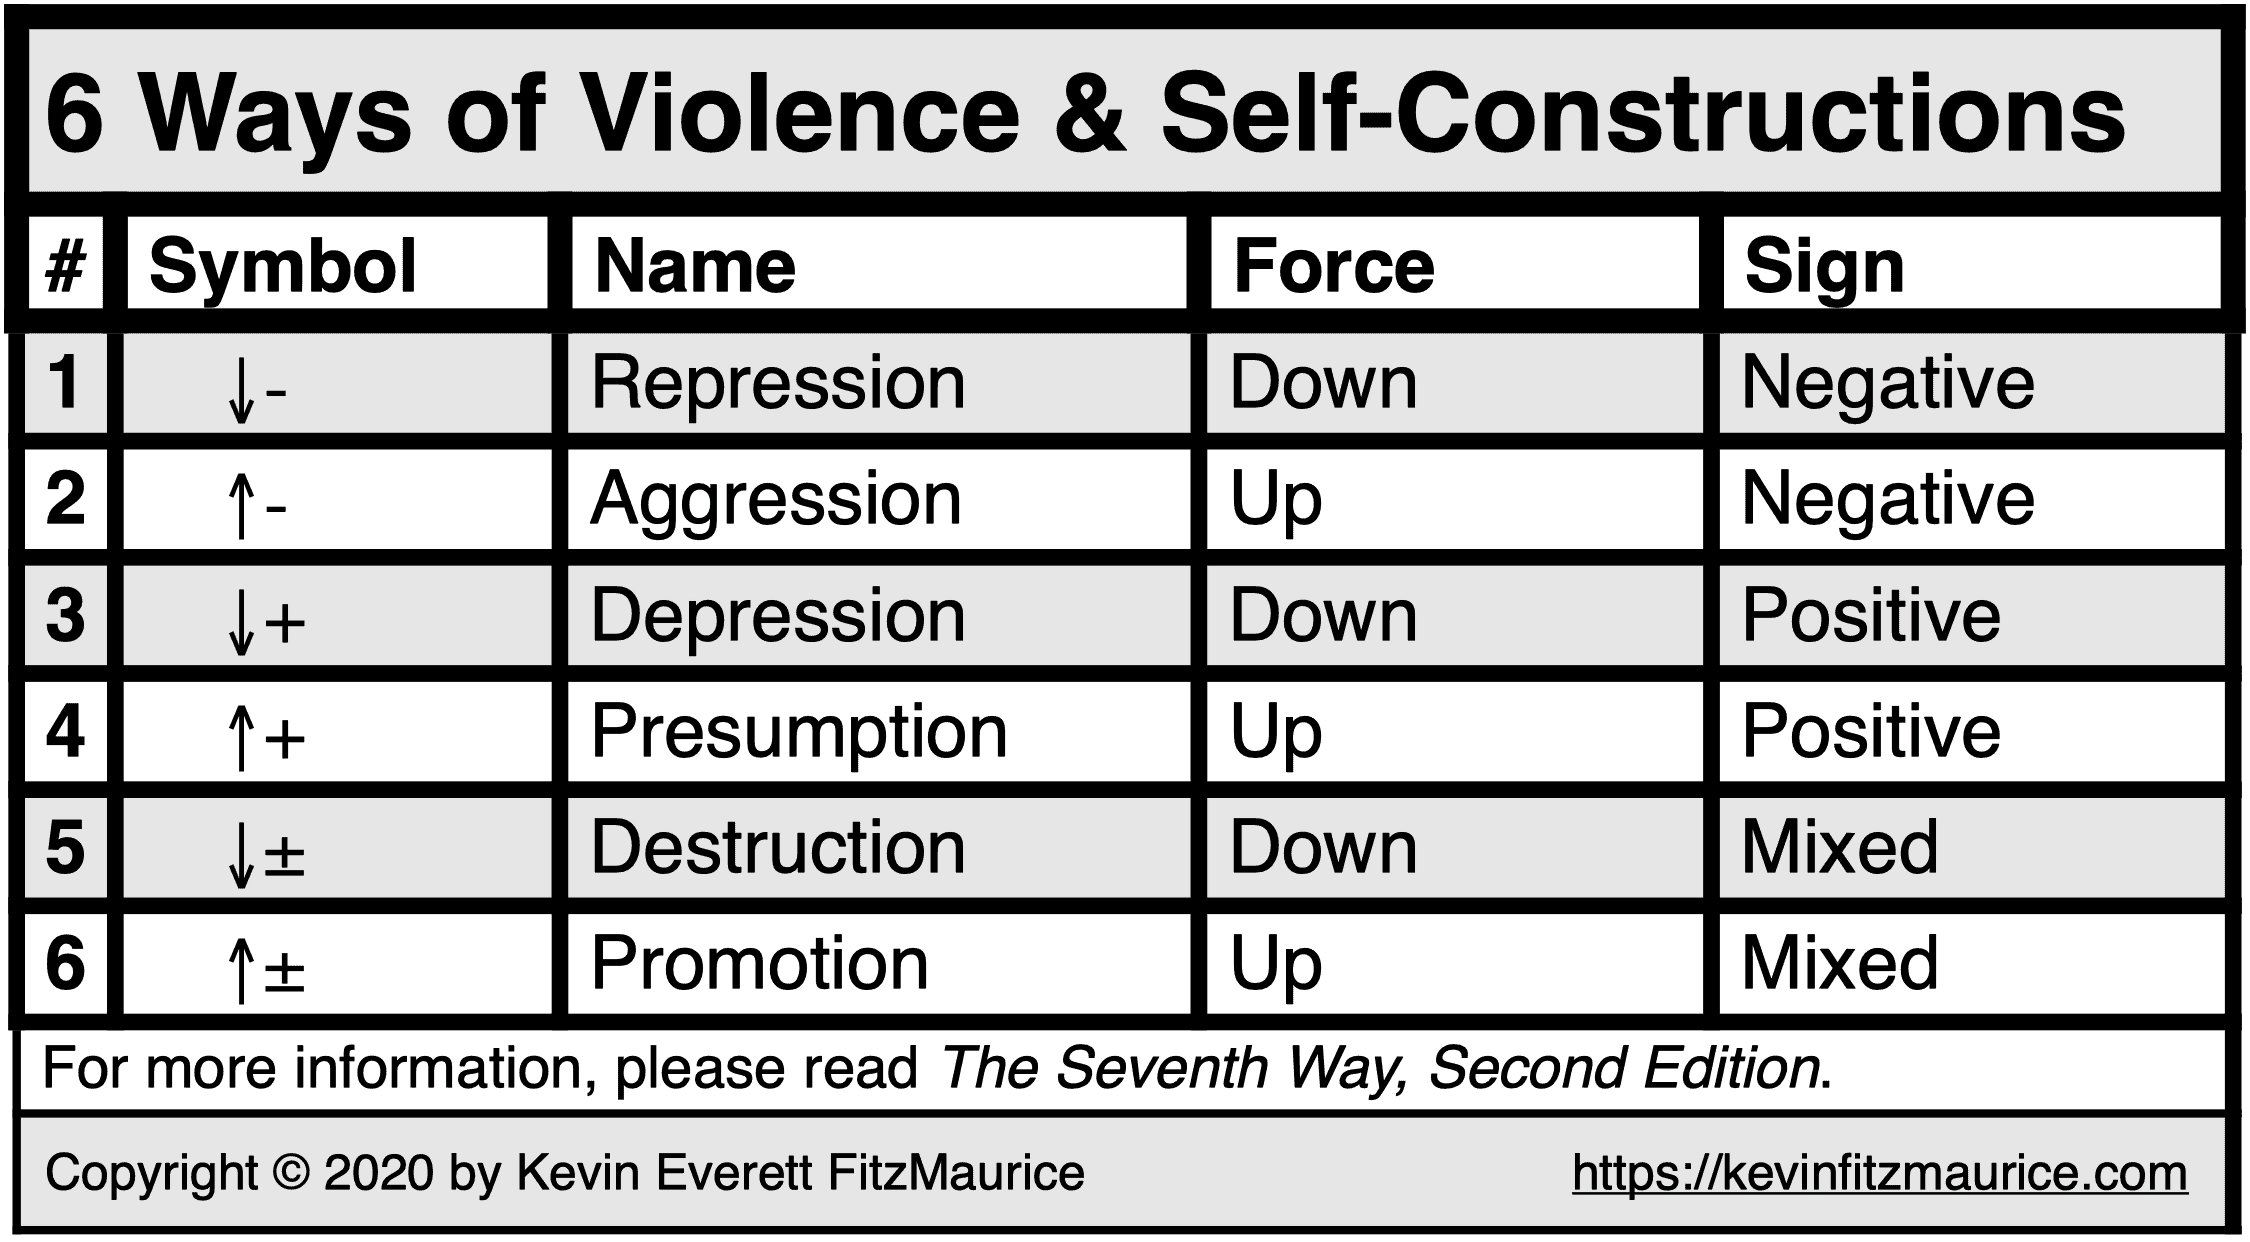 6 Ways of Violence & Self-Constructions